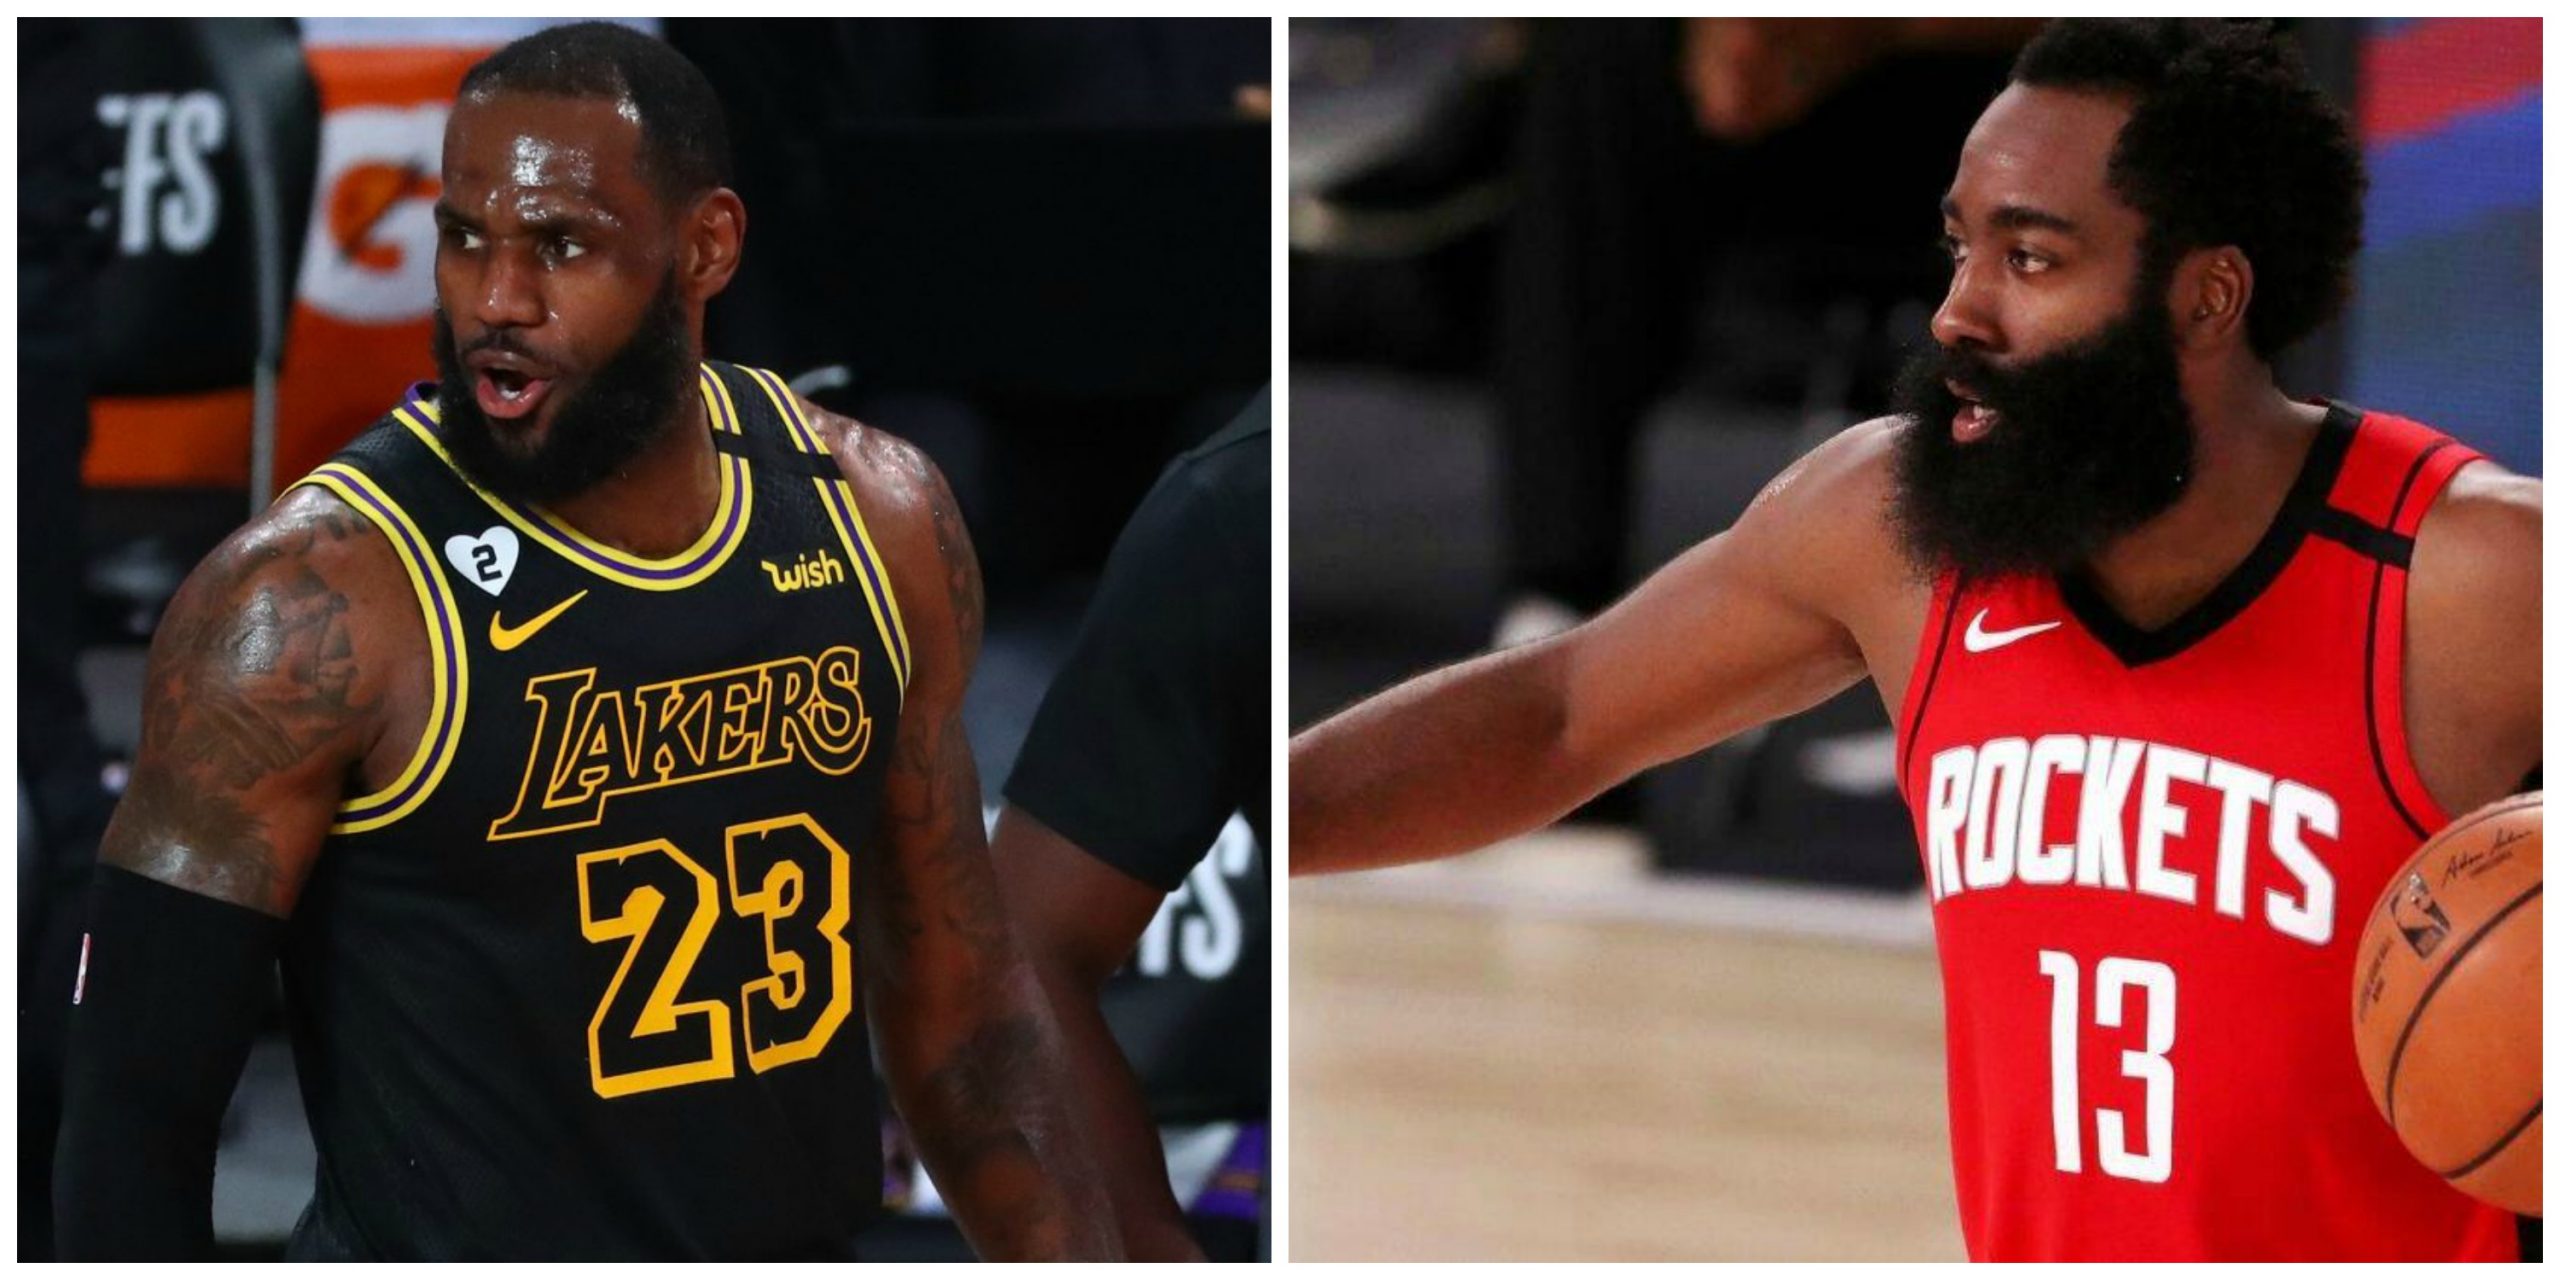 Lakers Versus Rockets in 2020 Western Conference Semifinals